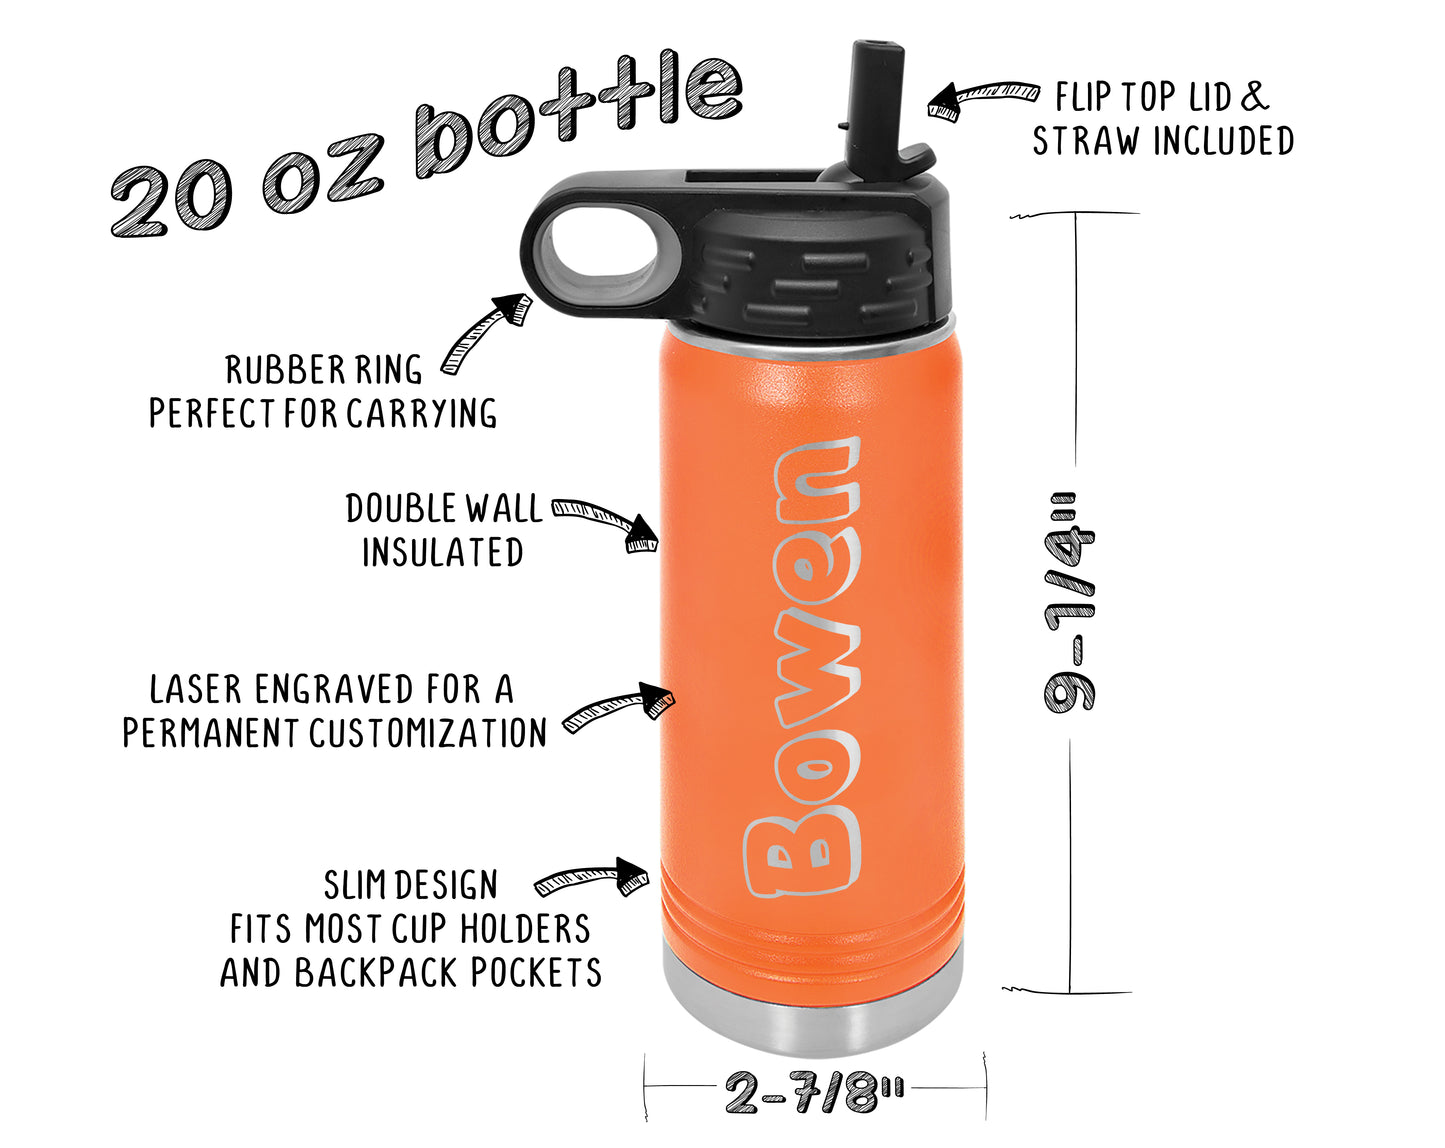 20 oz bottle specifications, flip top lid and straw included, rubber ring for carrying, double wall insulated, laser engraved, slim design